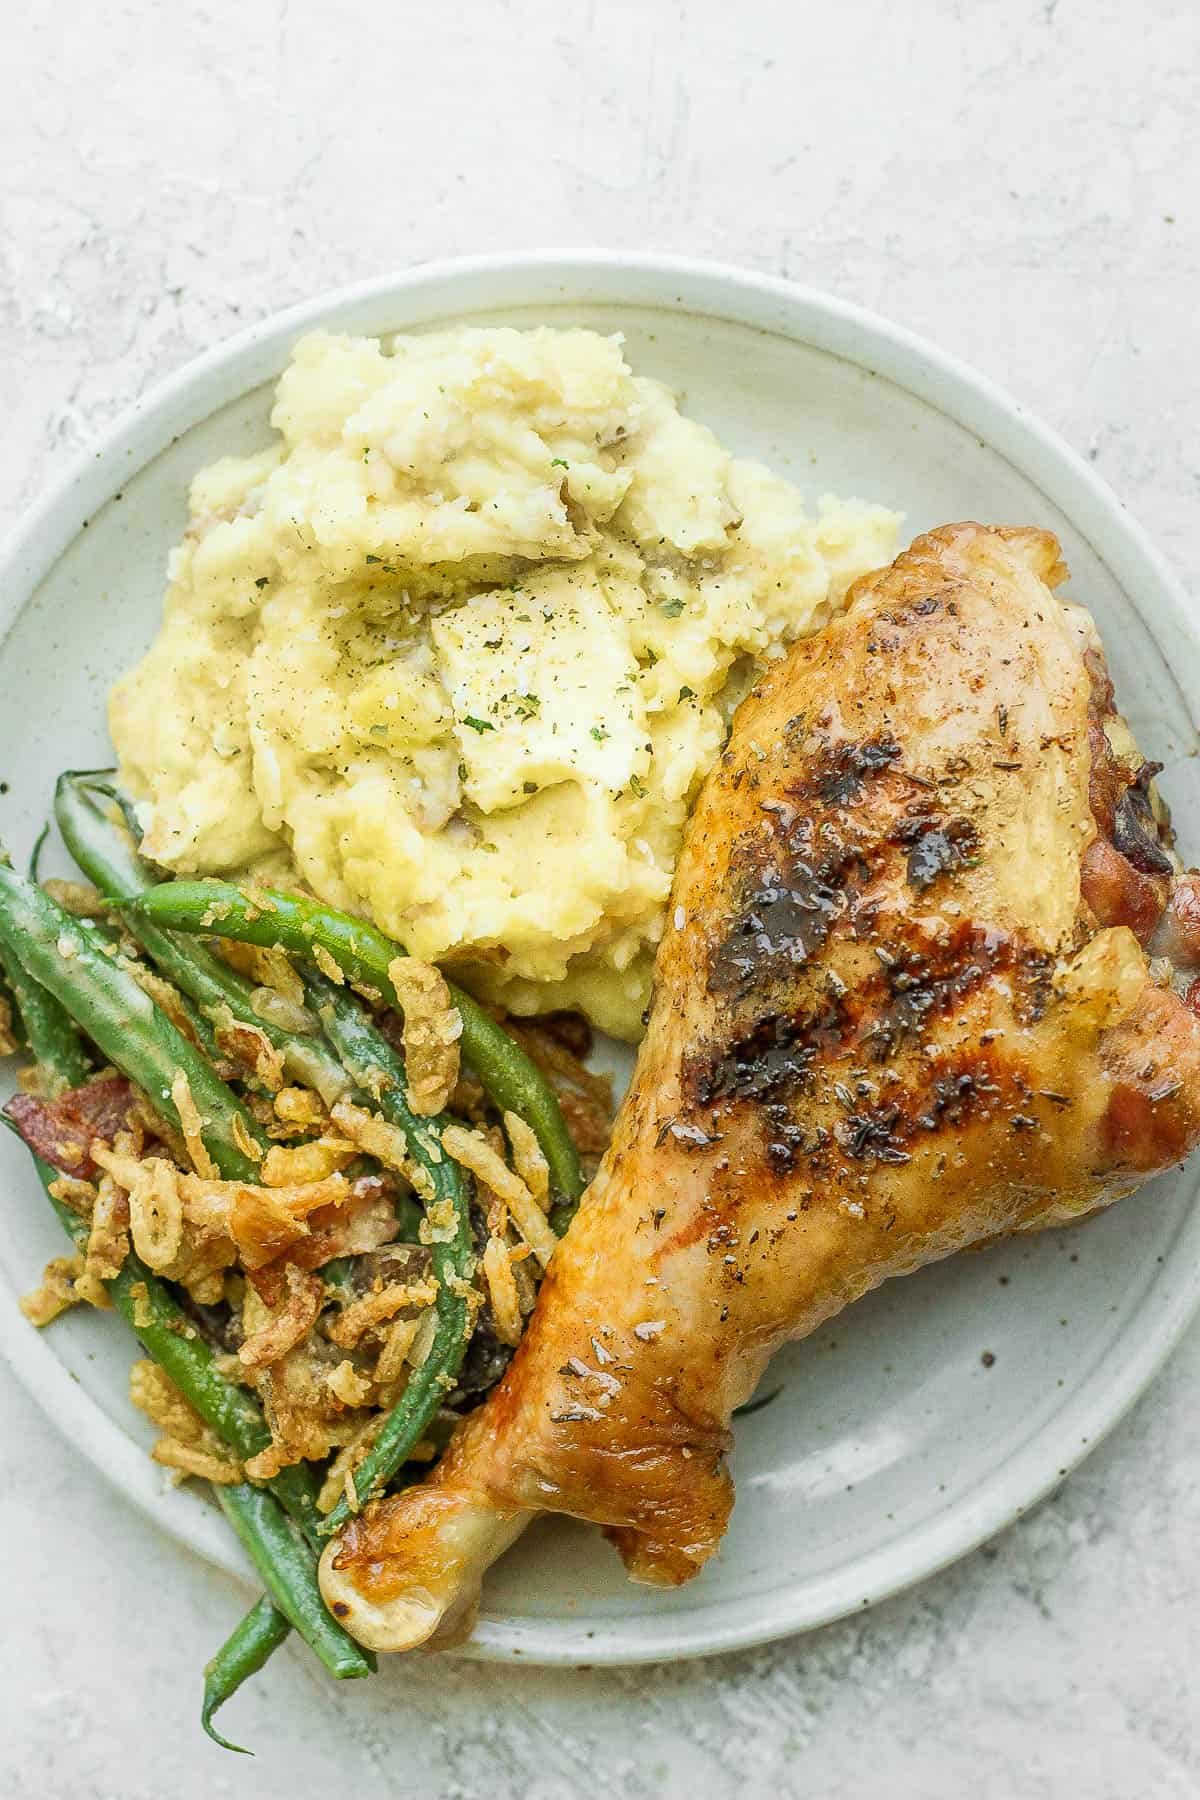 Smoked turkey legs with sides of mashed potatoes and green bean casserole.